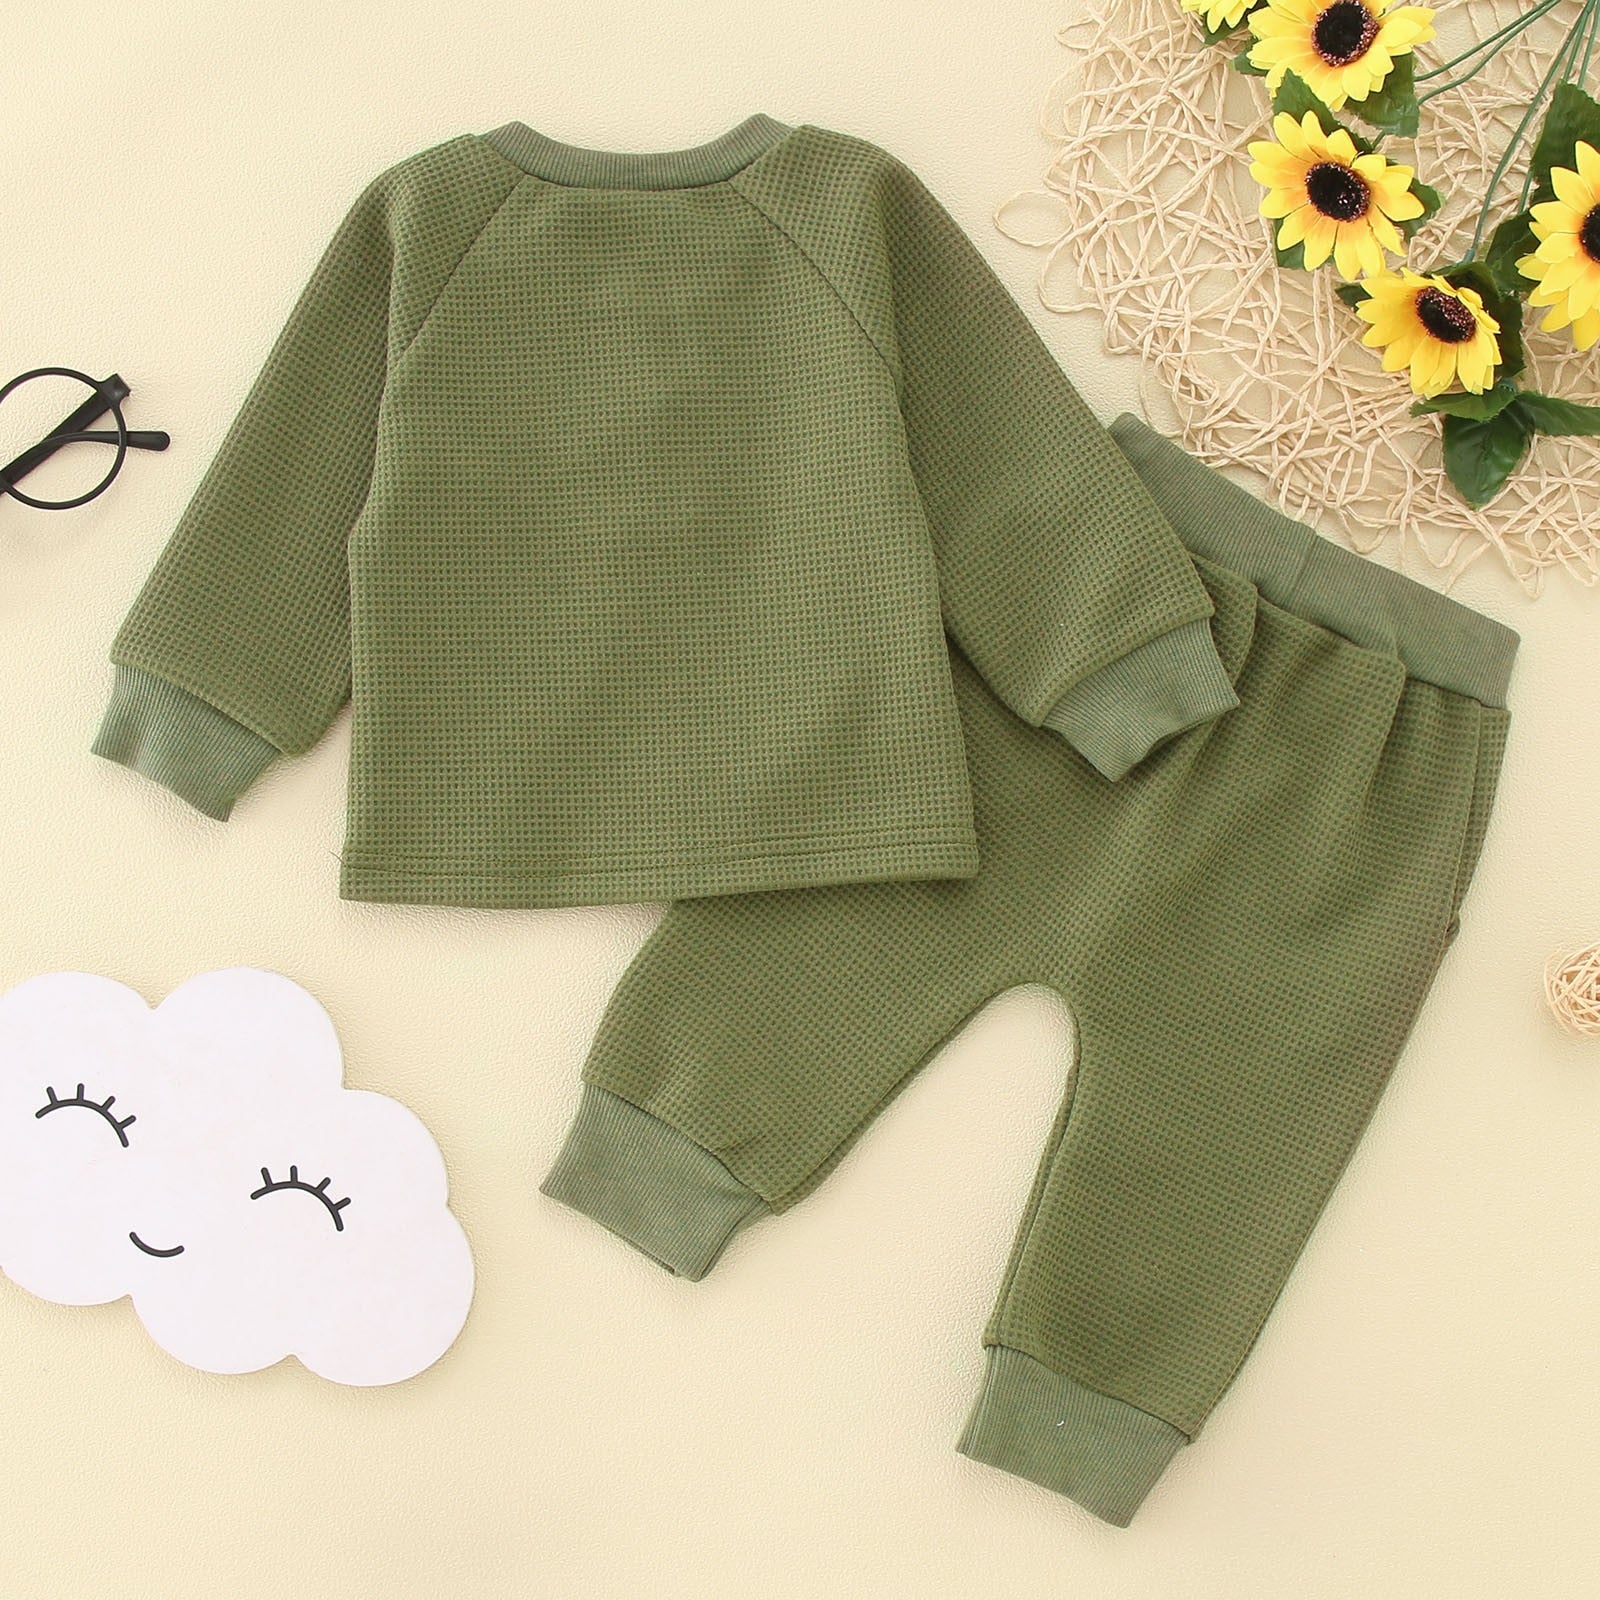 Infant Shirt with Bow Tie Toddler Boys Winter Long Sleeve Solid Colors 2PCS Outfit